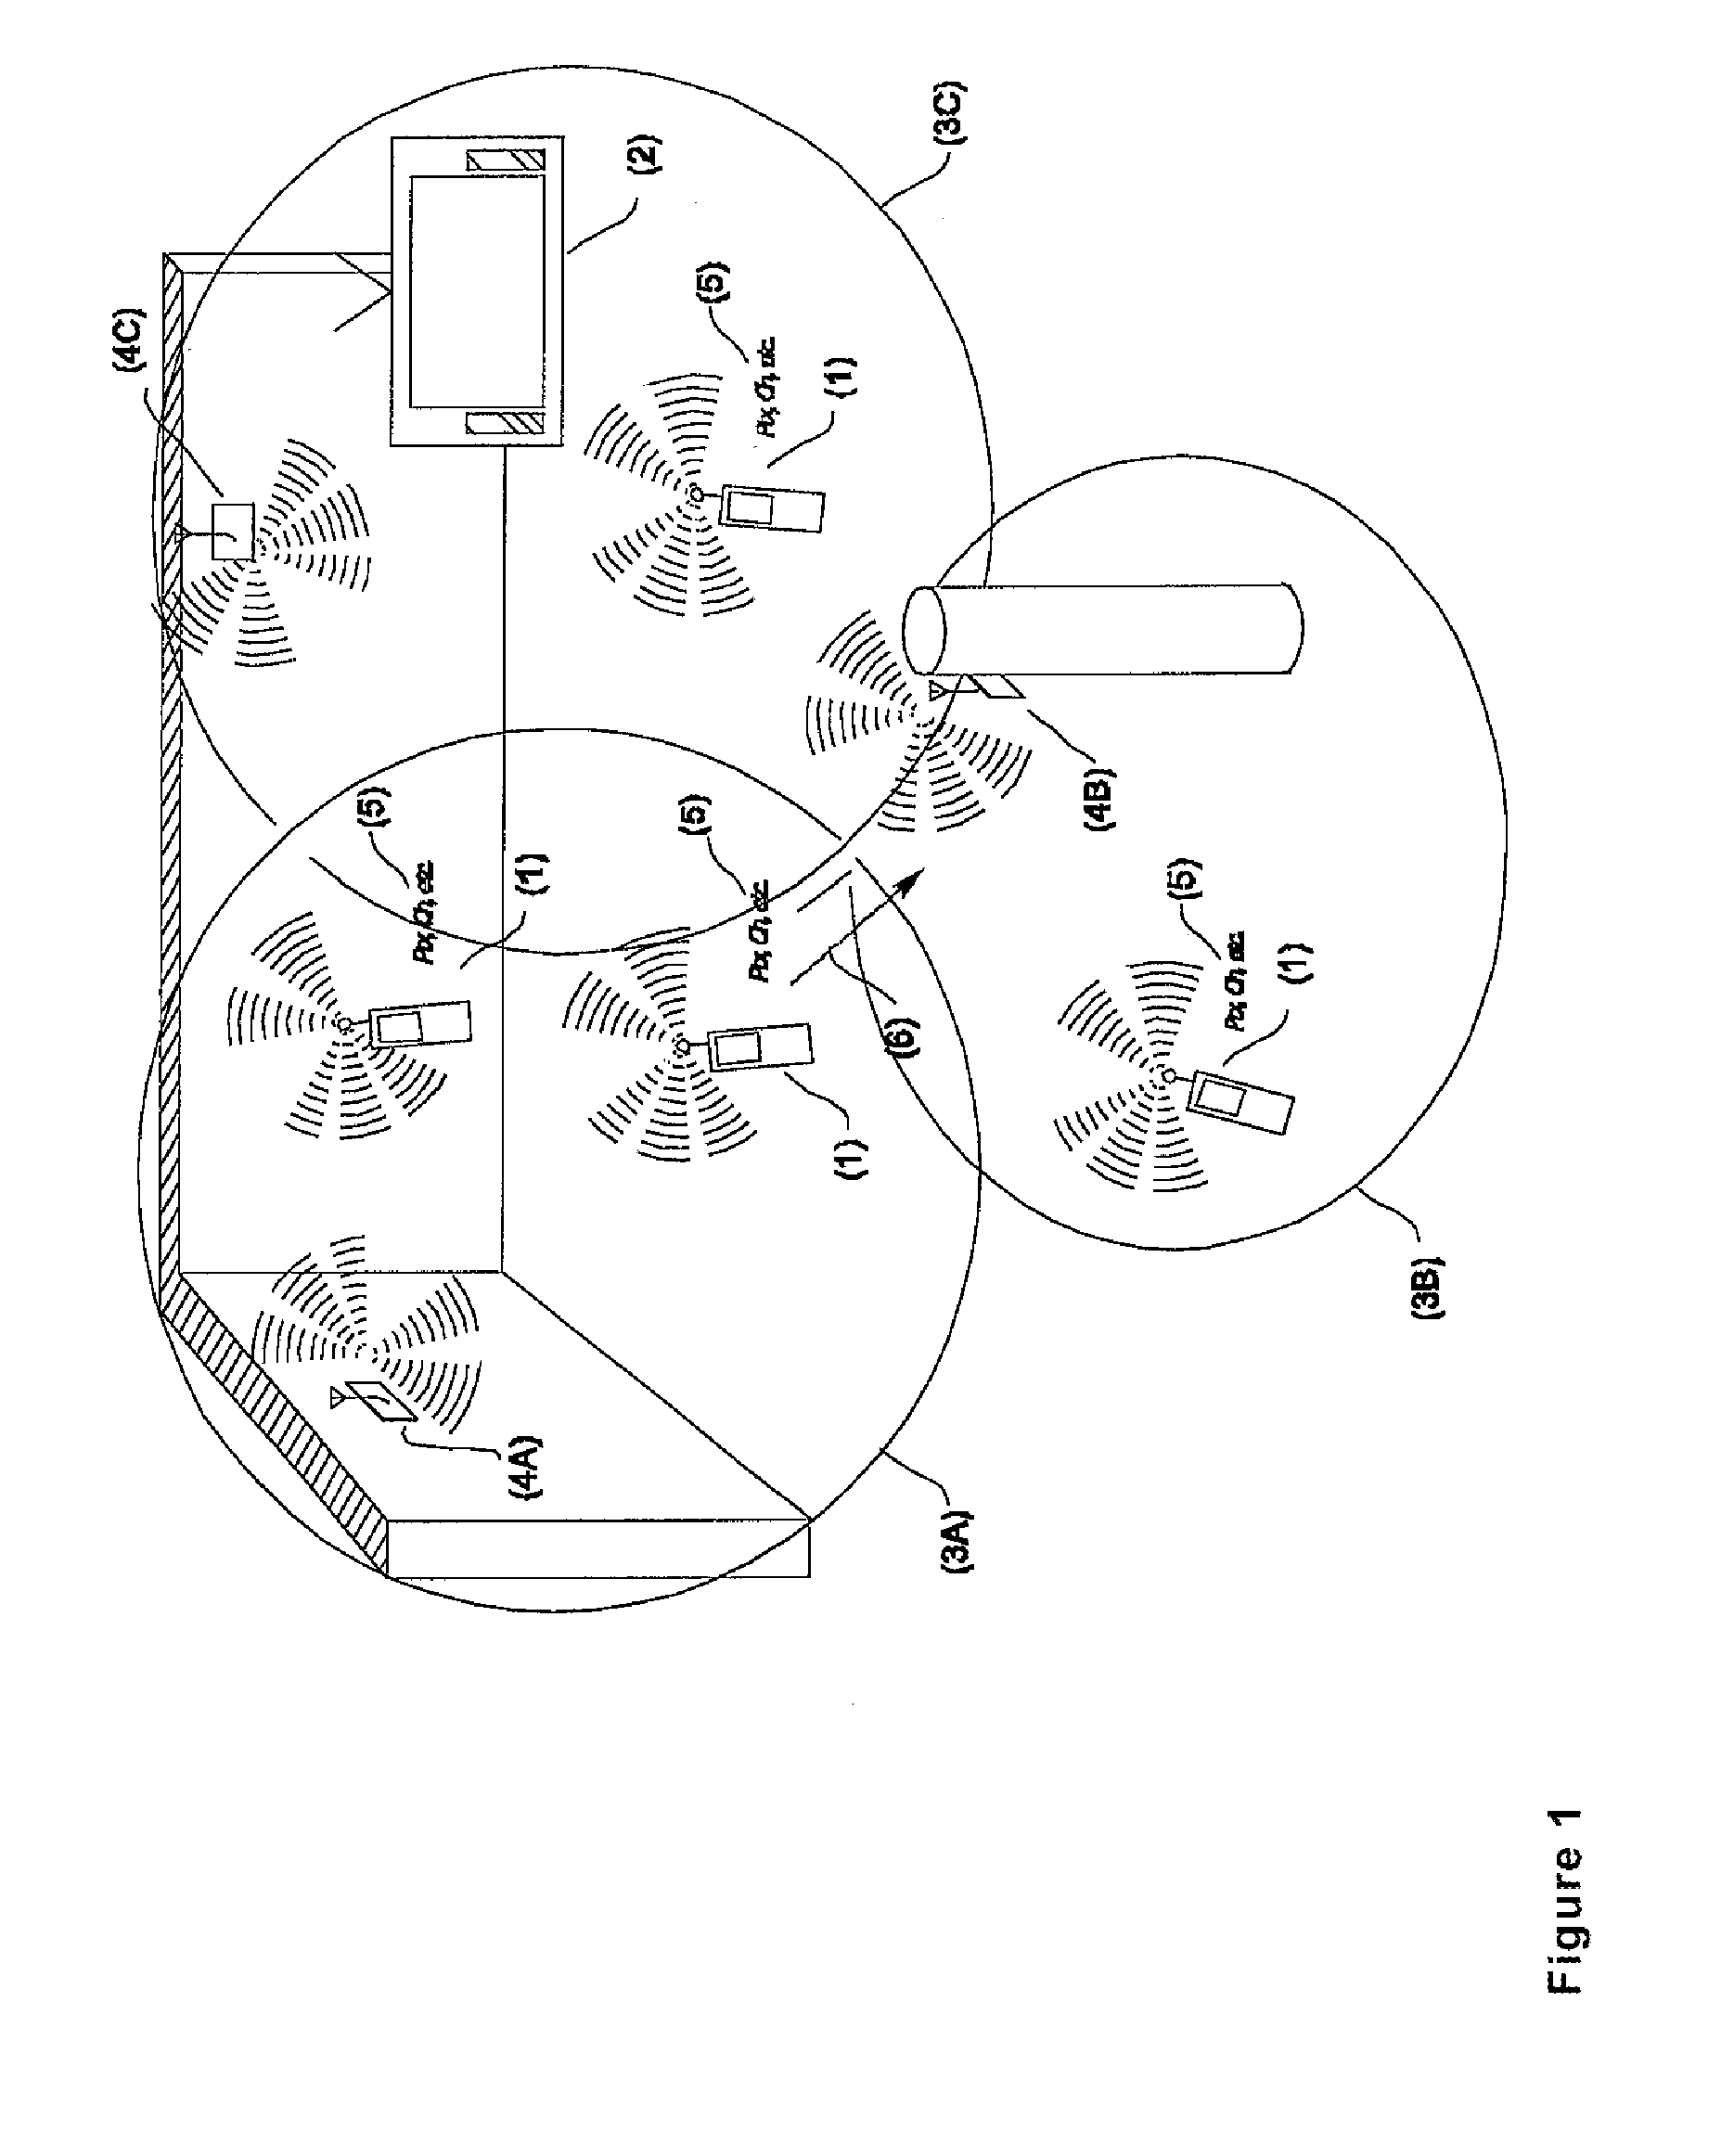 Photonic cell control device and method for ultra-wideband (UWB) transmitters/receivers